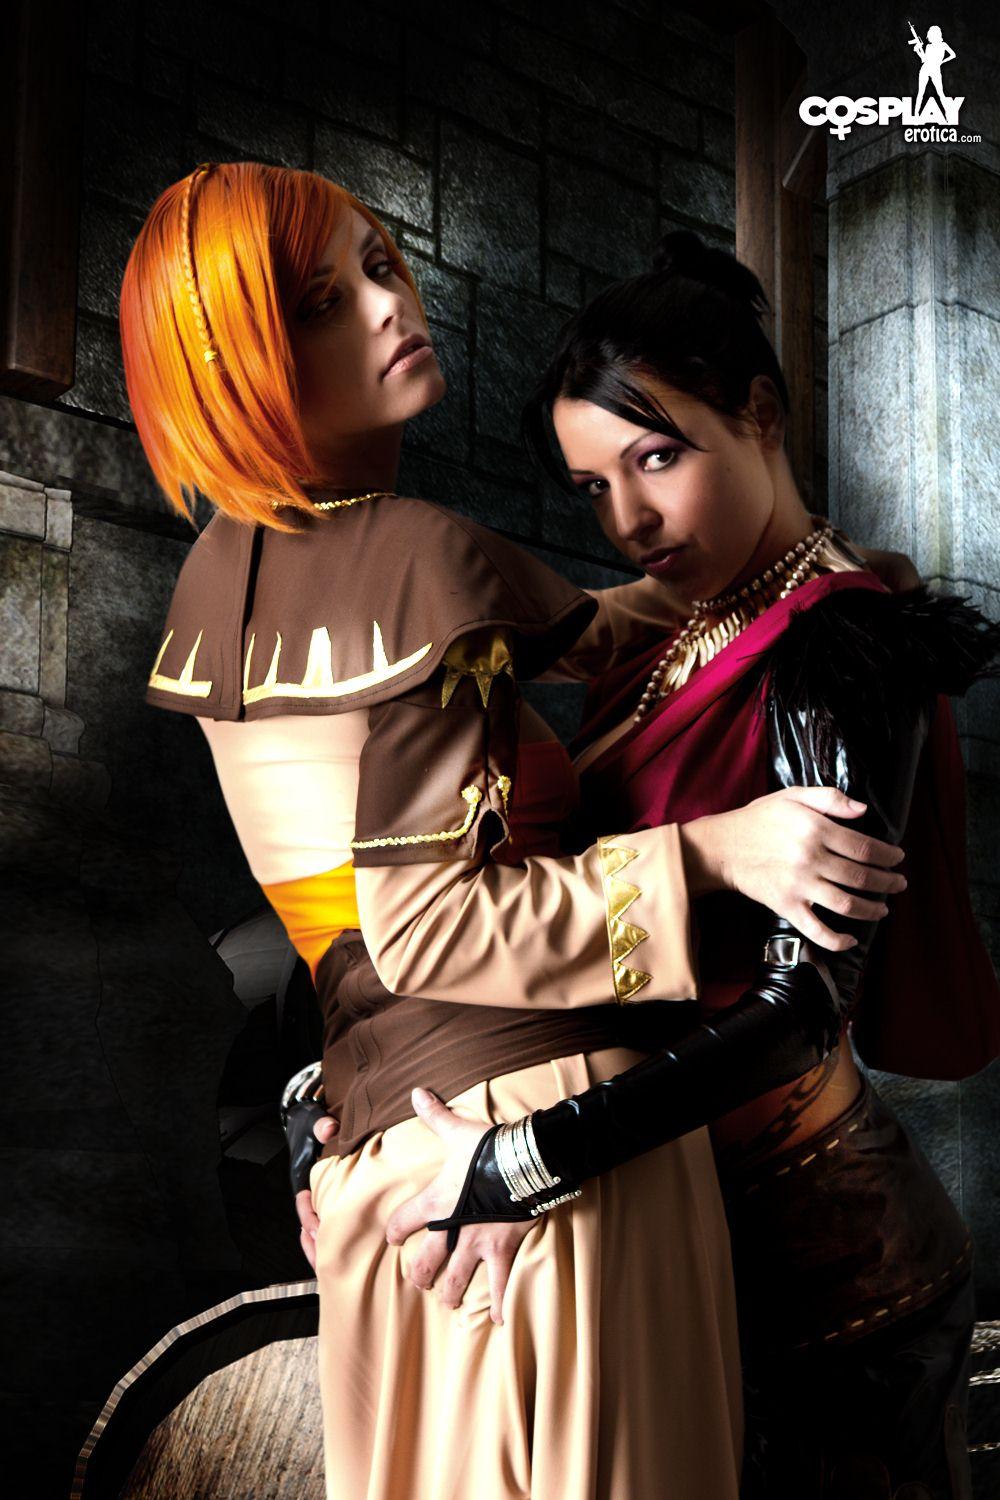 Pictures of Nayma and Mea doing a hot lesbian Dragon Age cosplay #59444445